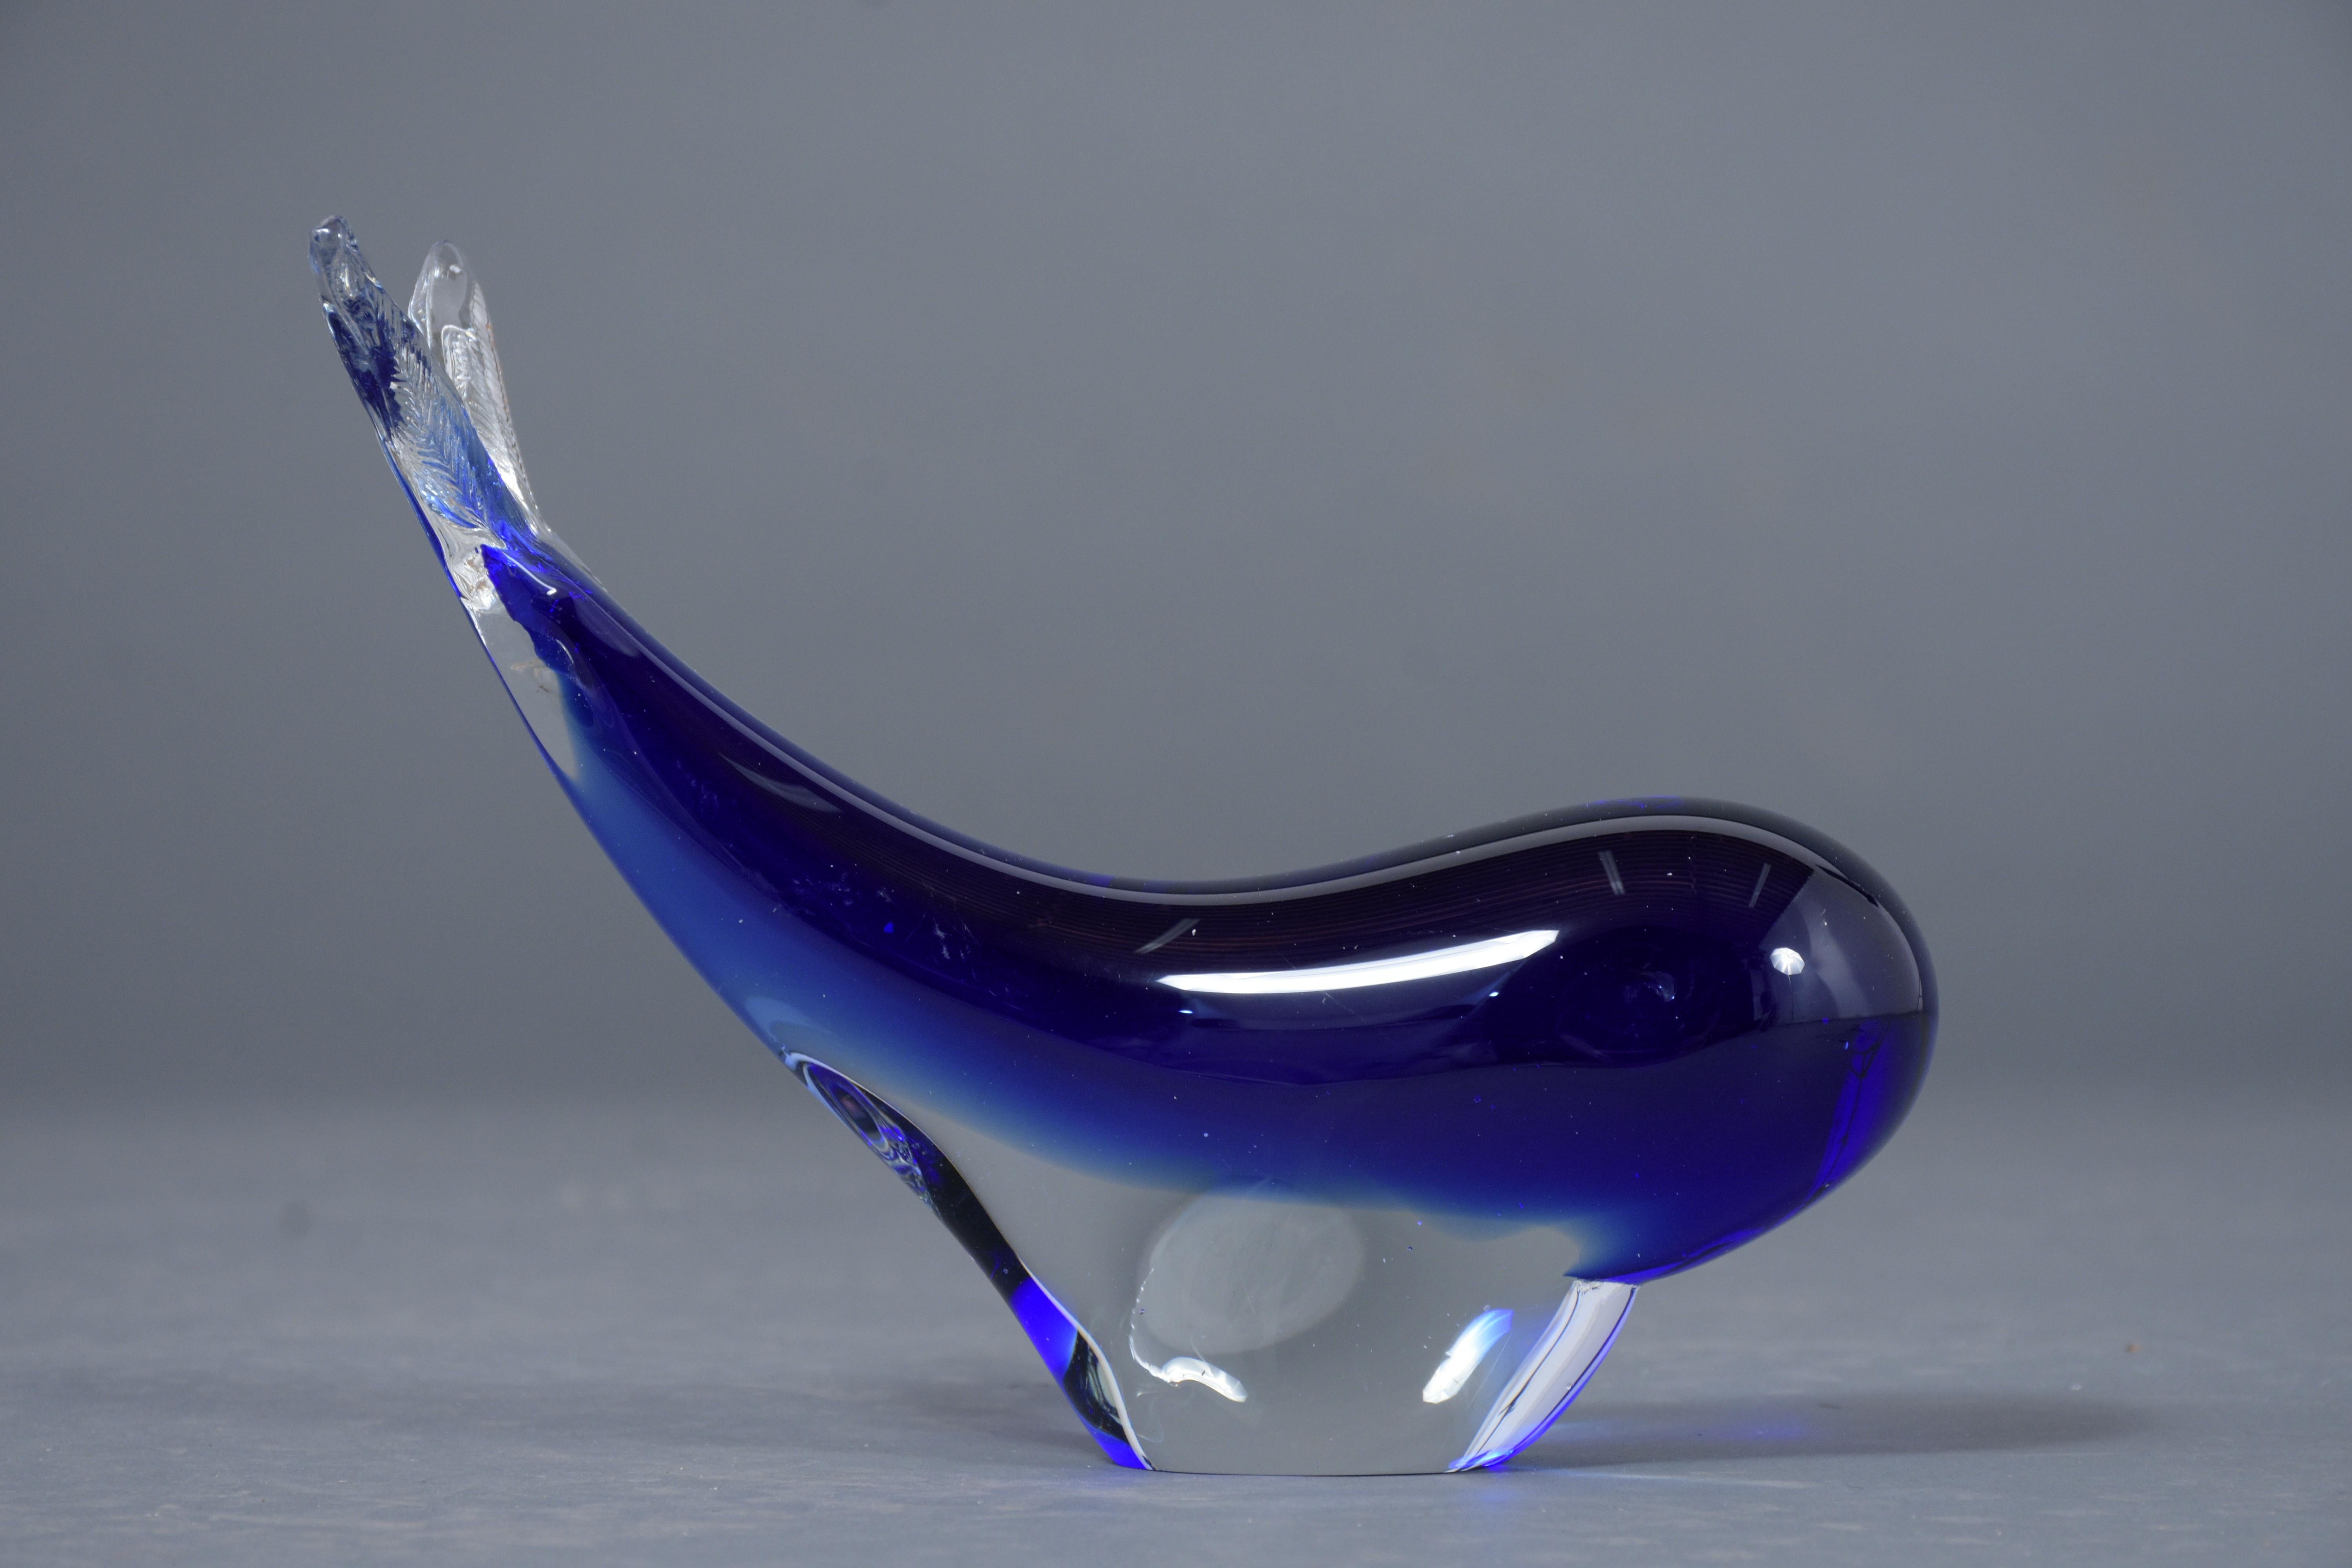 A beautiful Italian Murano Art Glass whale sculpture, this fabulous handcrafted art glass piece is eye-catching and ready to be displayed in sophisticated home decor.